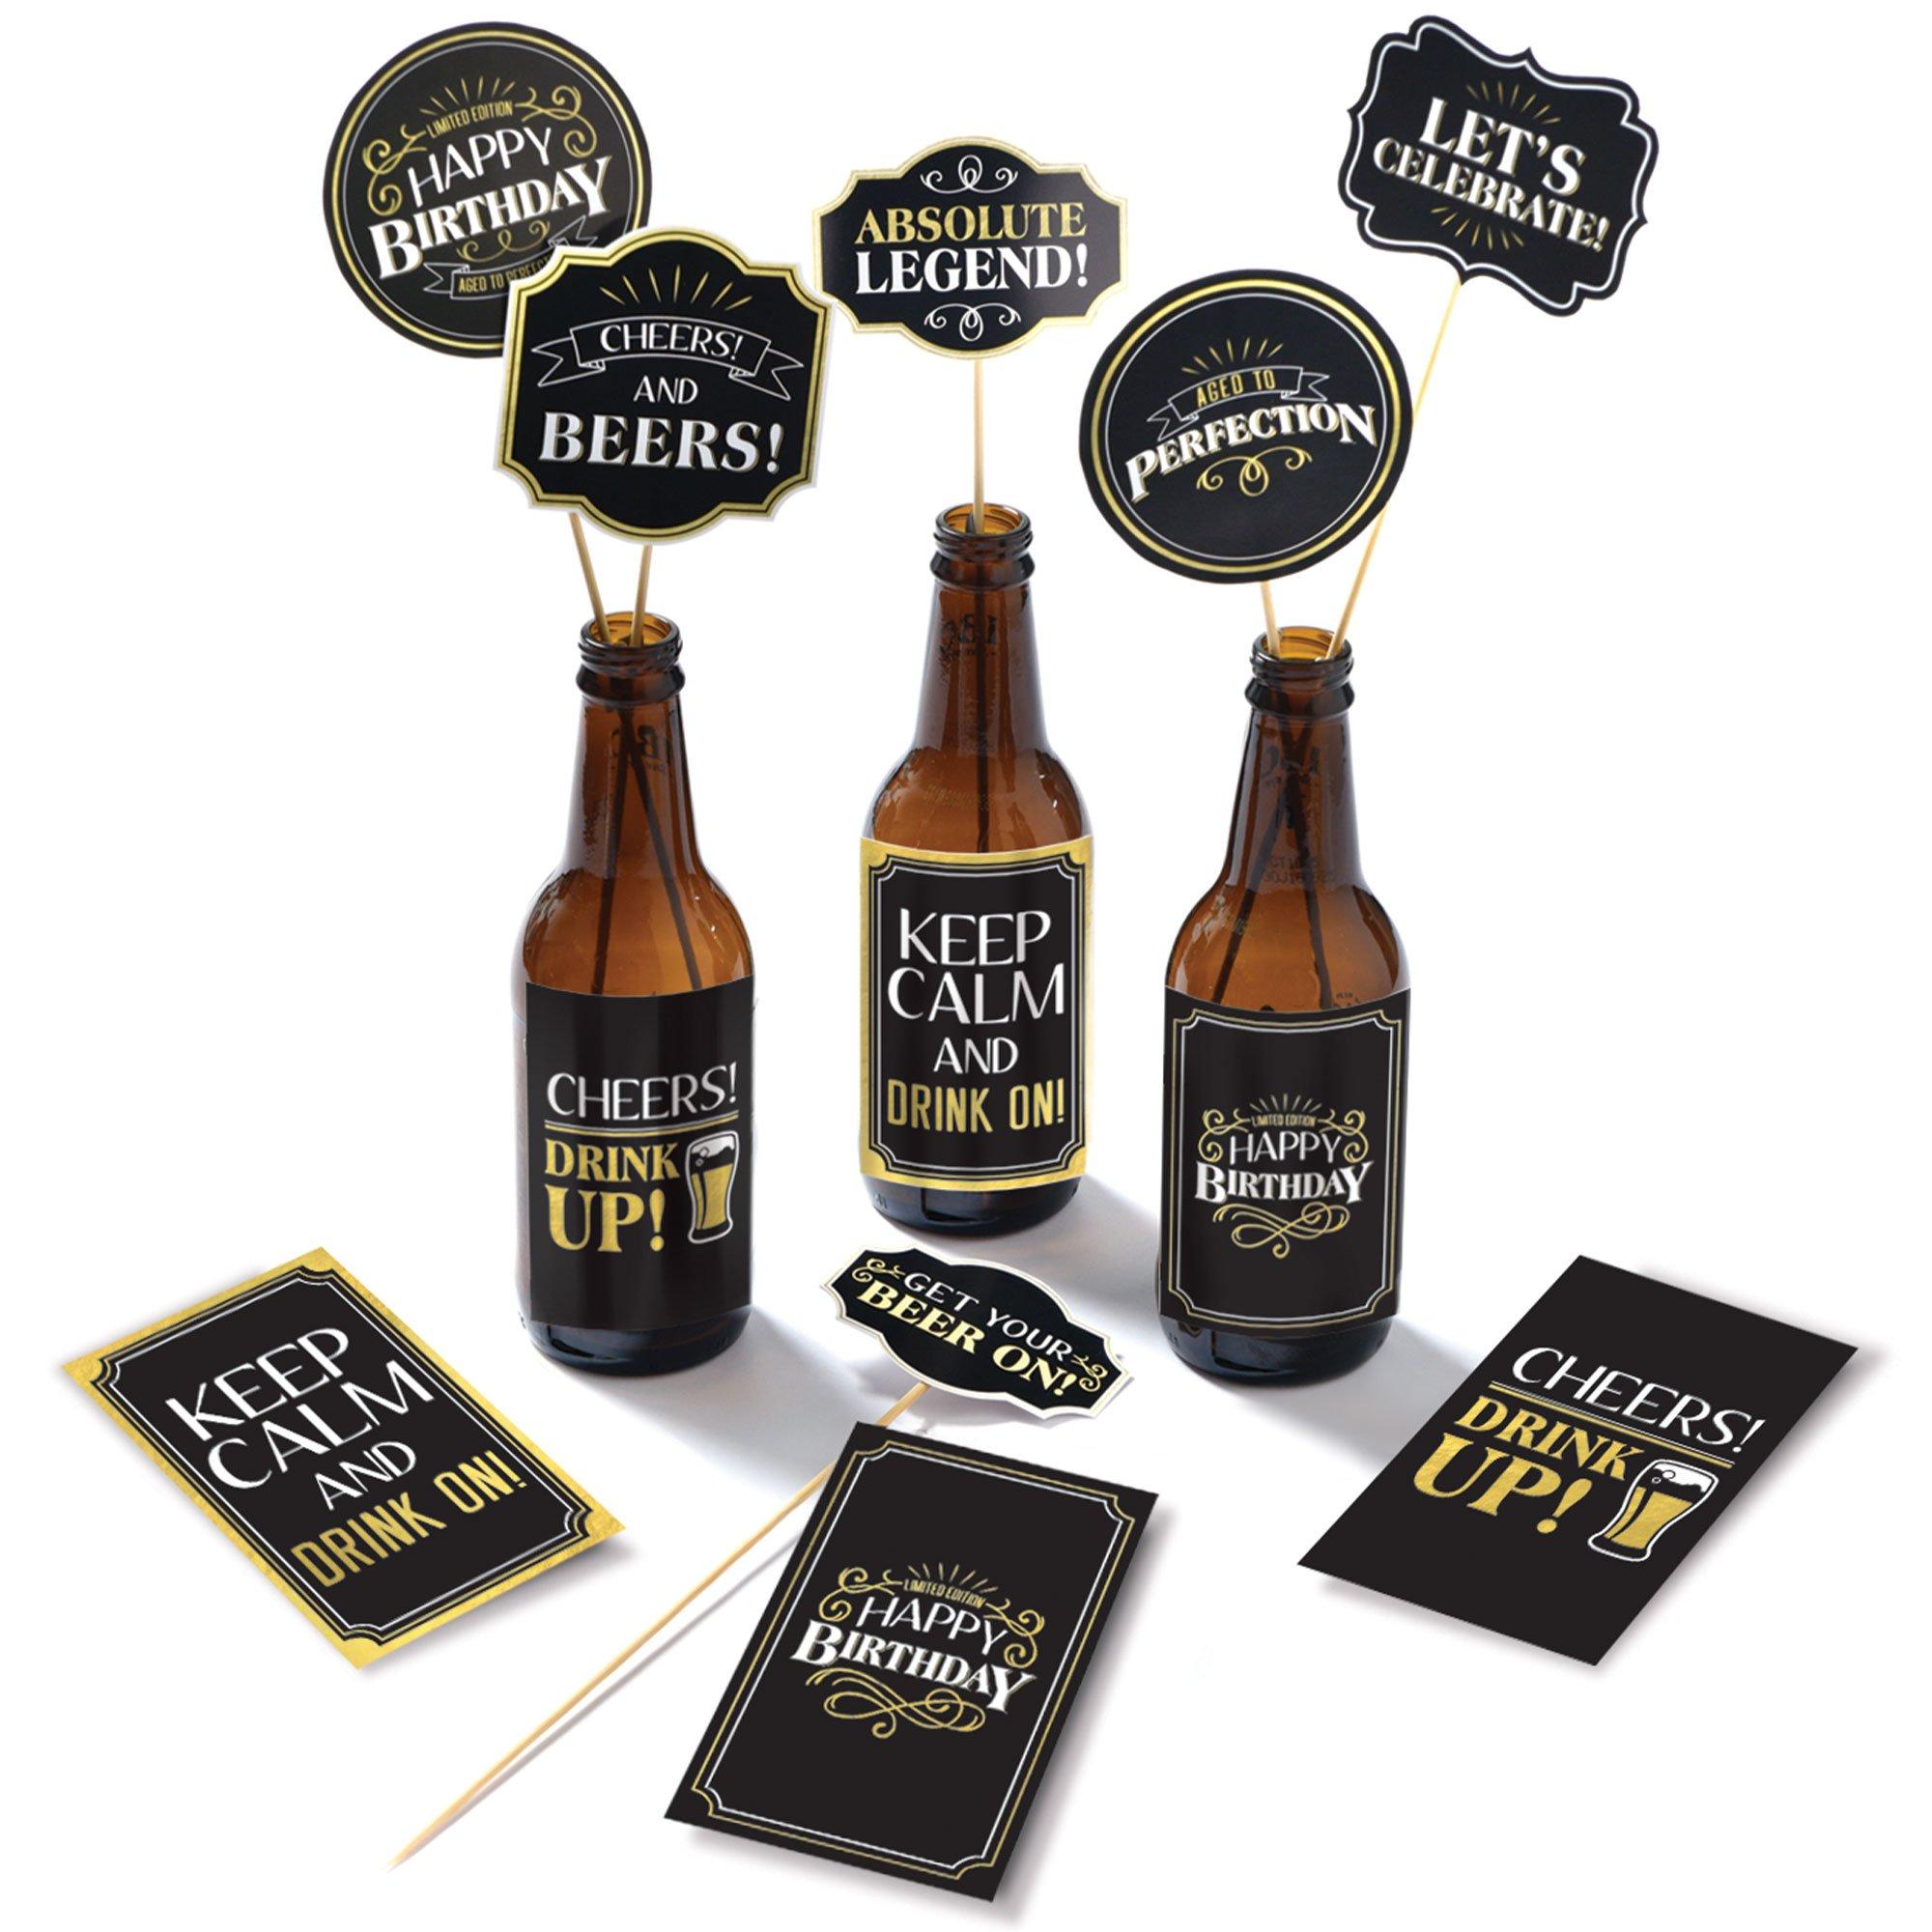 Celebrate Next Black & Gold 60th Birthday / Anniversary Cheers Themed Small Party Favor Gift Bags with Tags -12pack, Women's